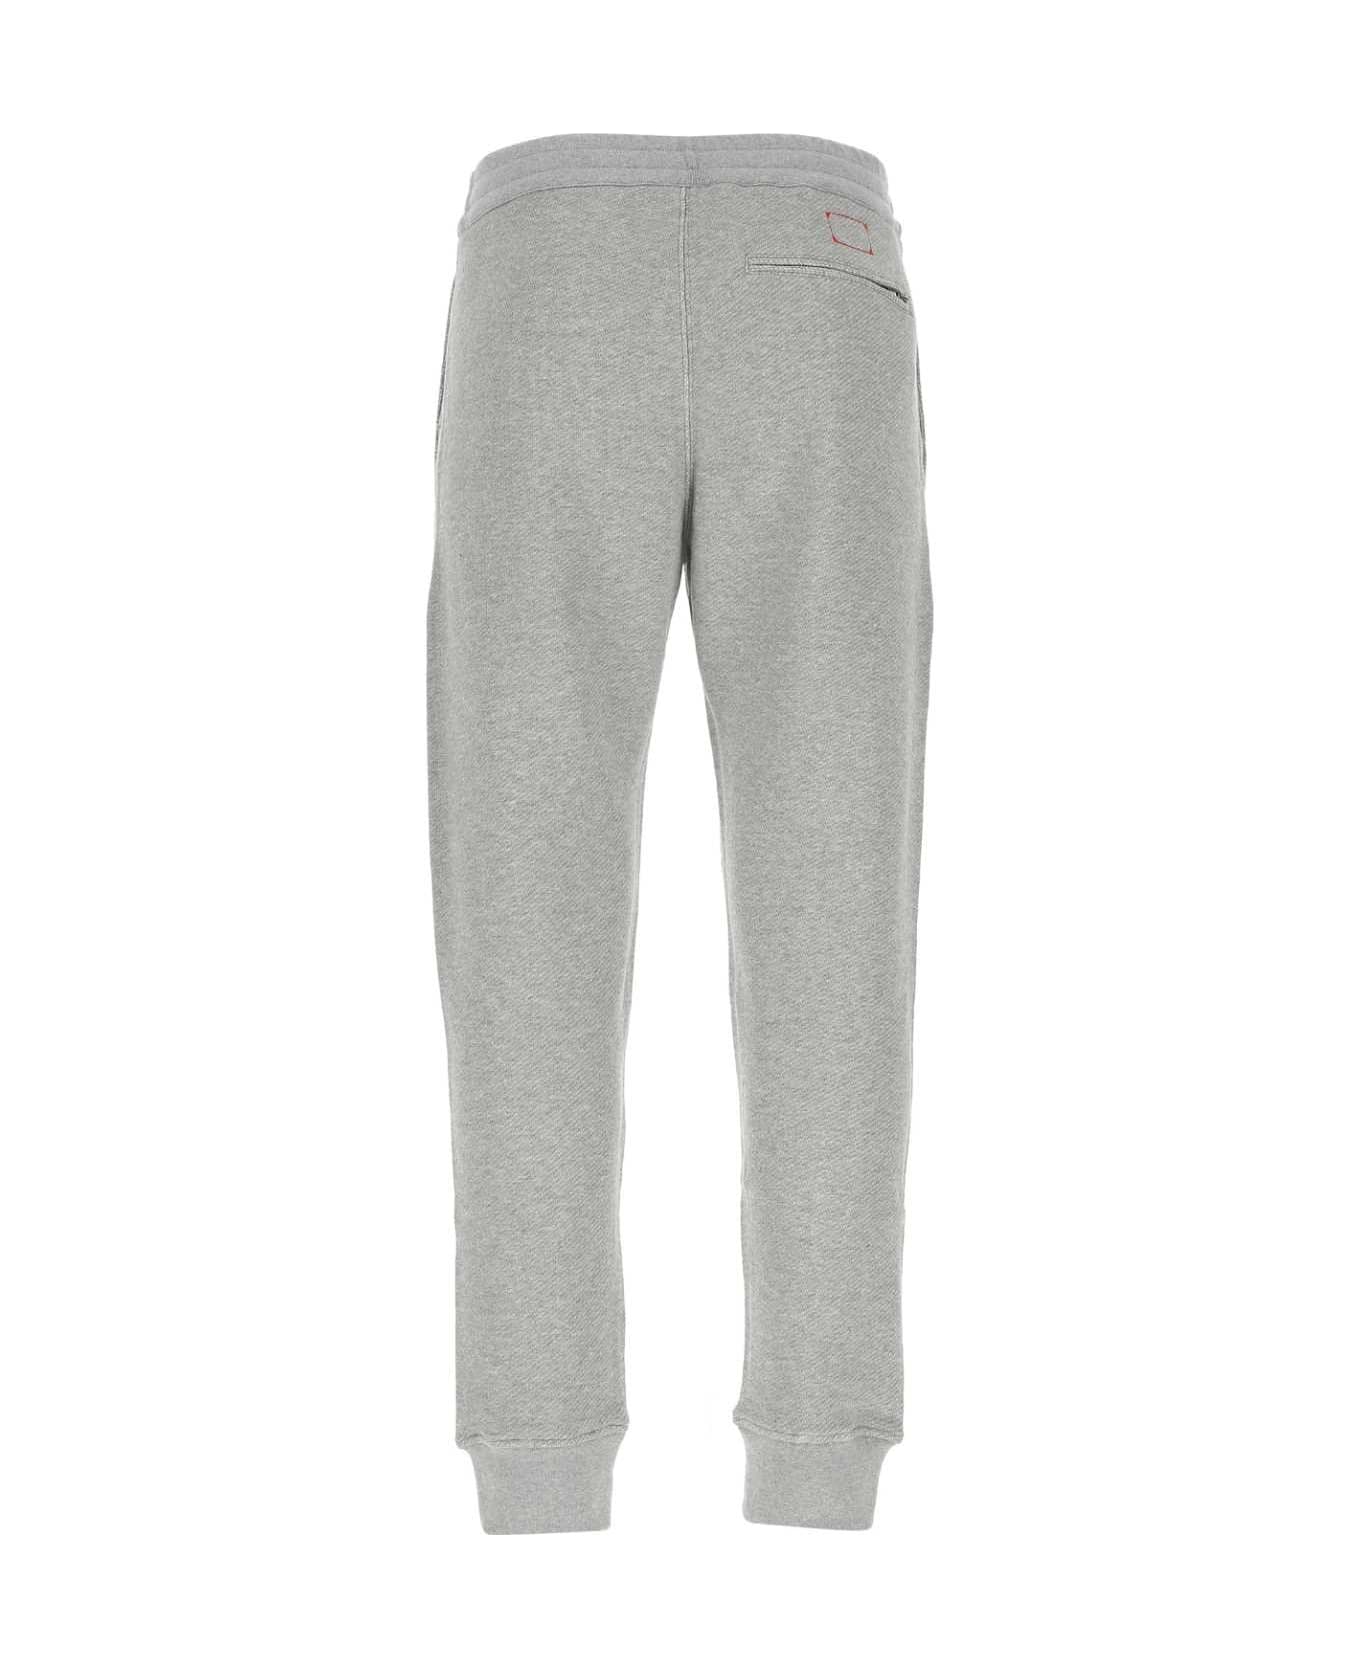 Alexander McQueen Logo Embroidered Track Pants - GREY